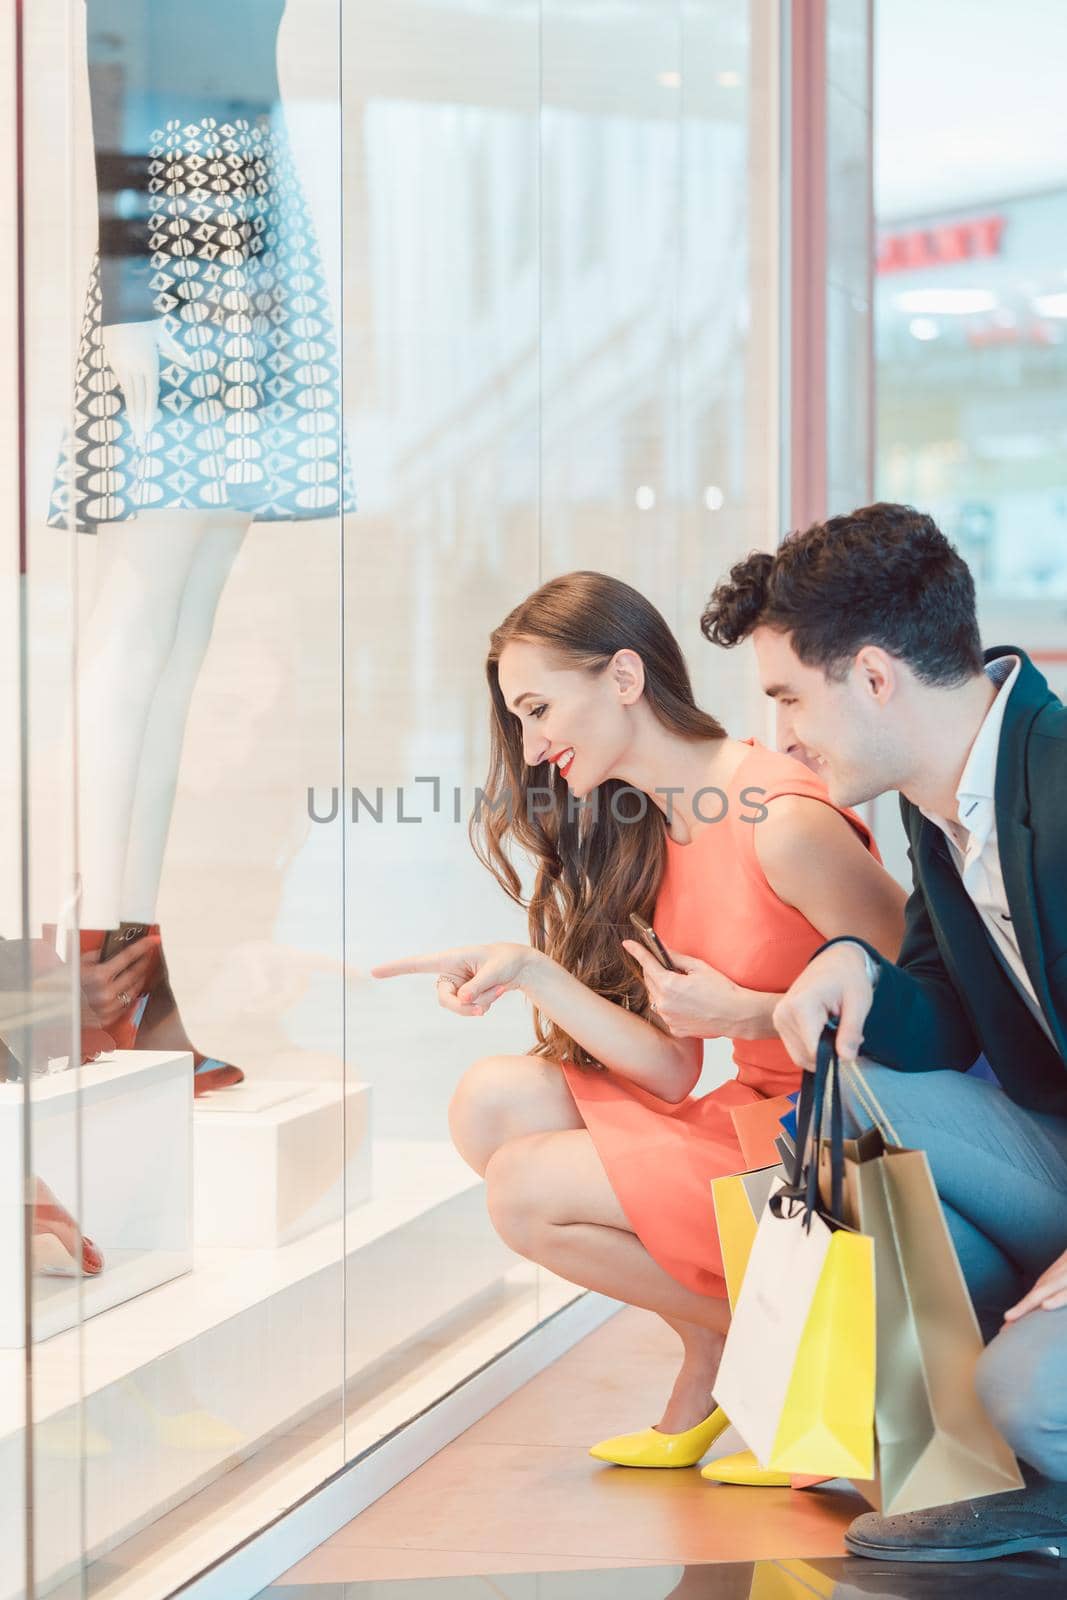 Woman and man looking at fashion shop window wanting to buy a dress